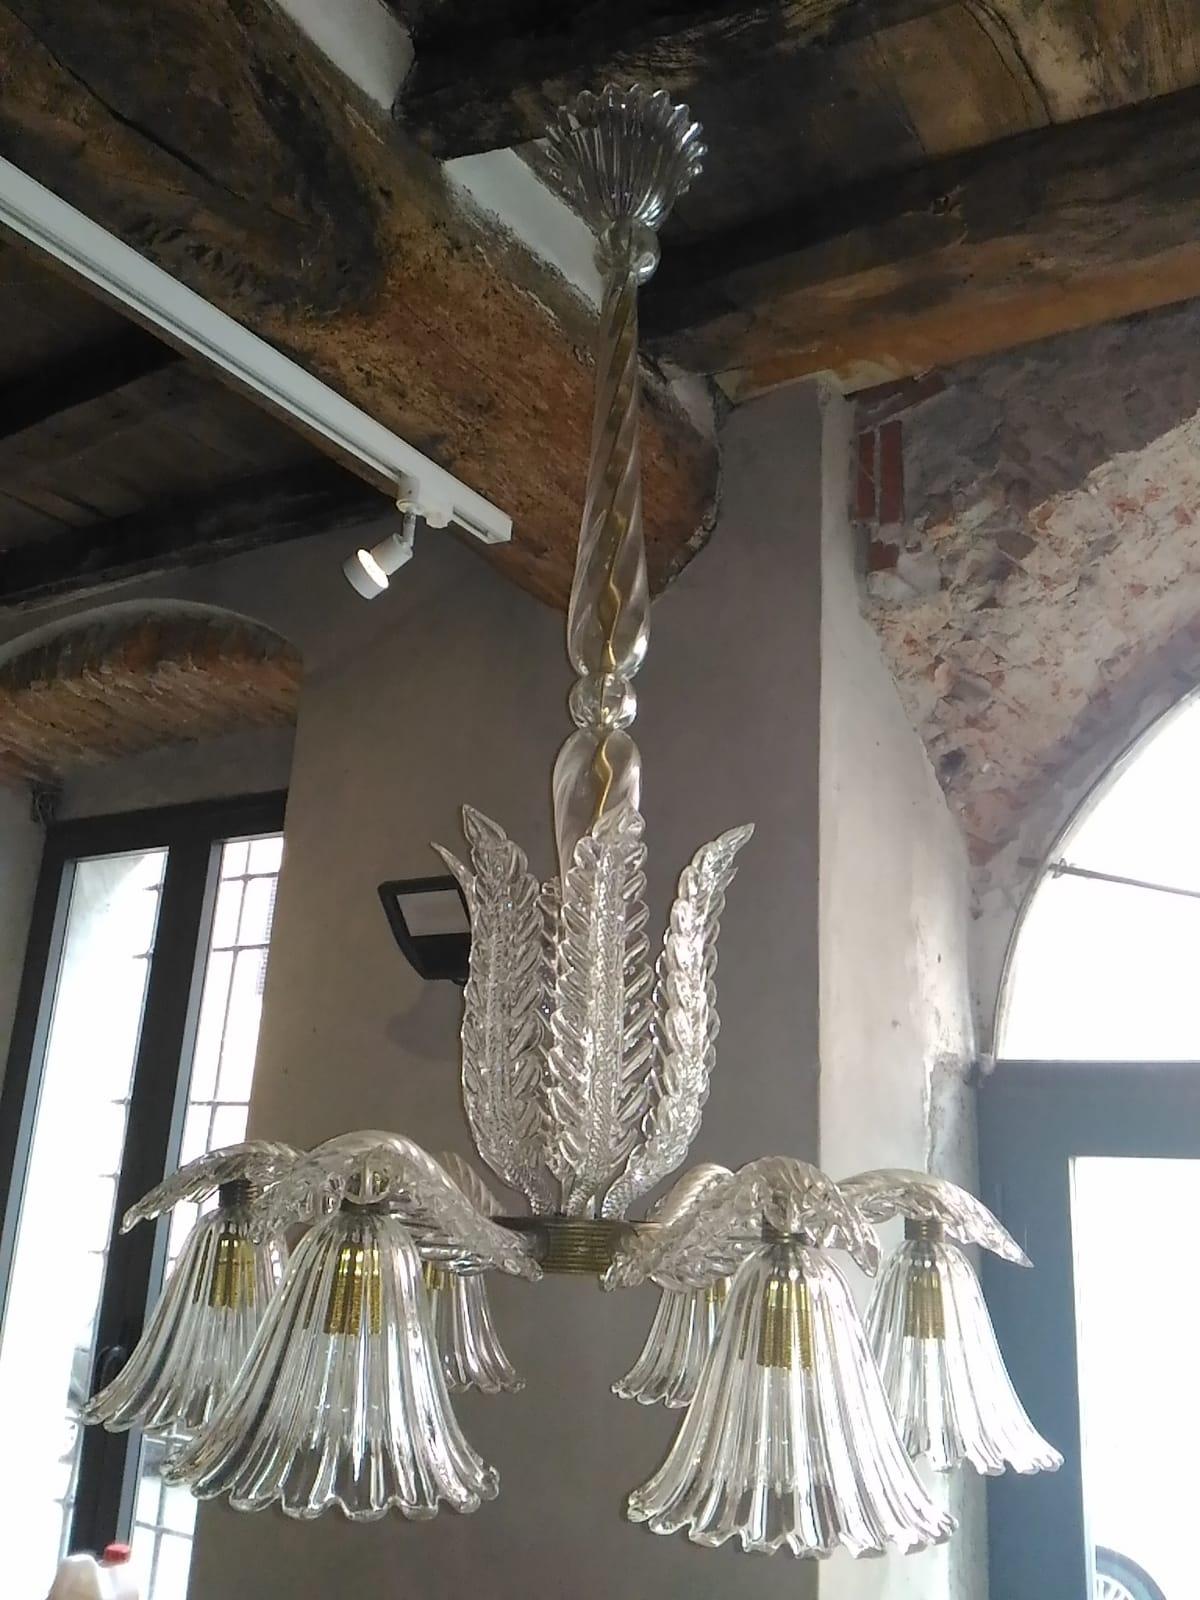 Hand blown Murano chandelier by Ercole Barovier, circa 1940. From Private collection.